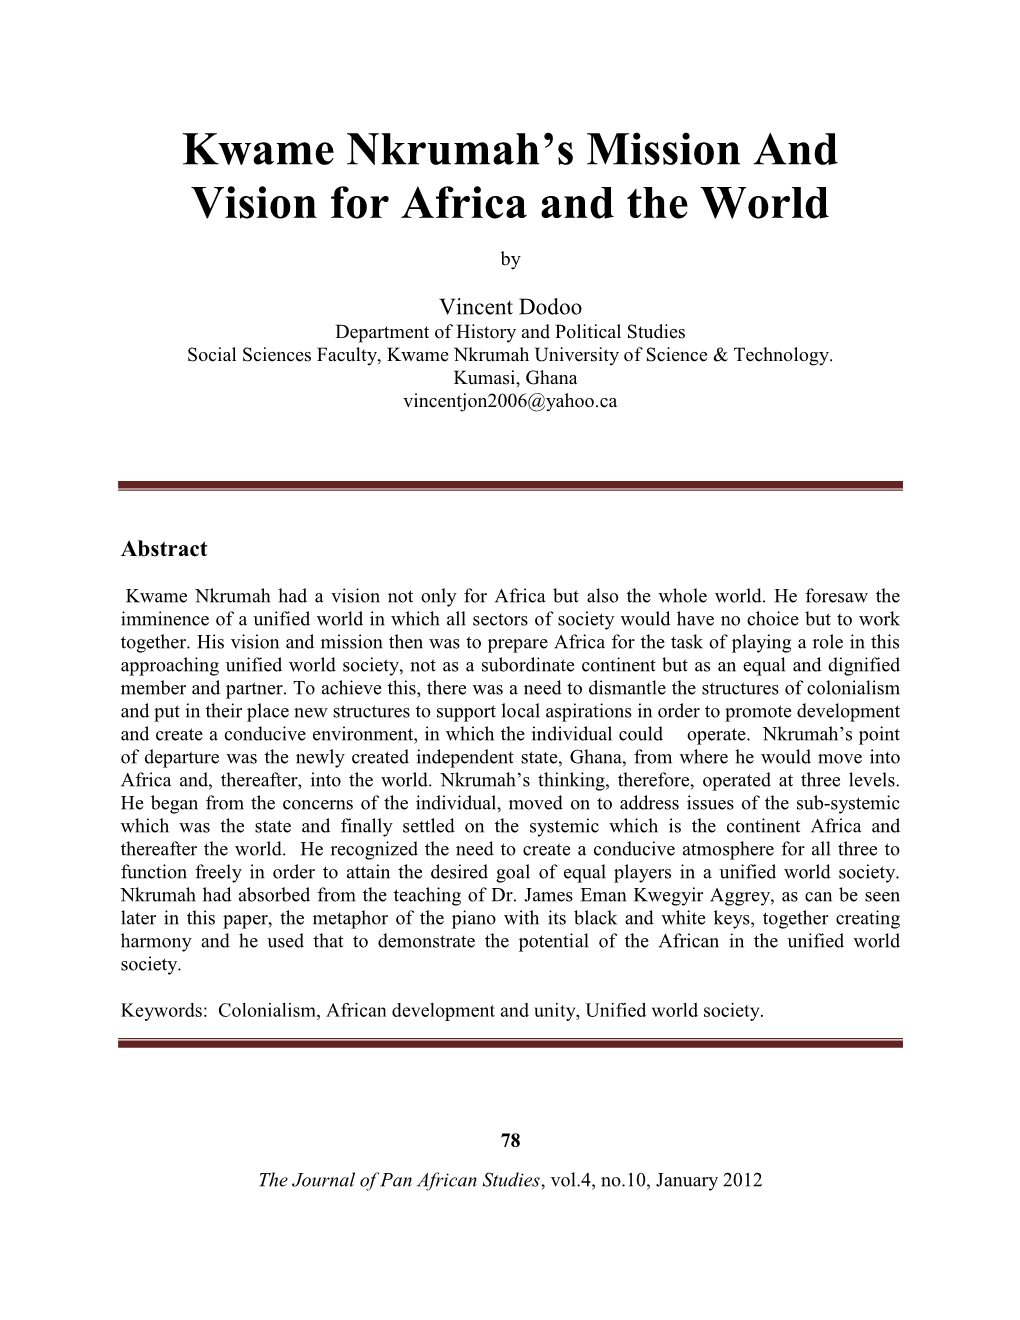 Kwame Nkrumah's Mission and Vision for Africa and the World